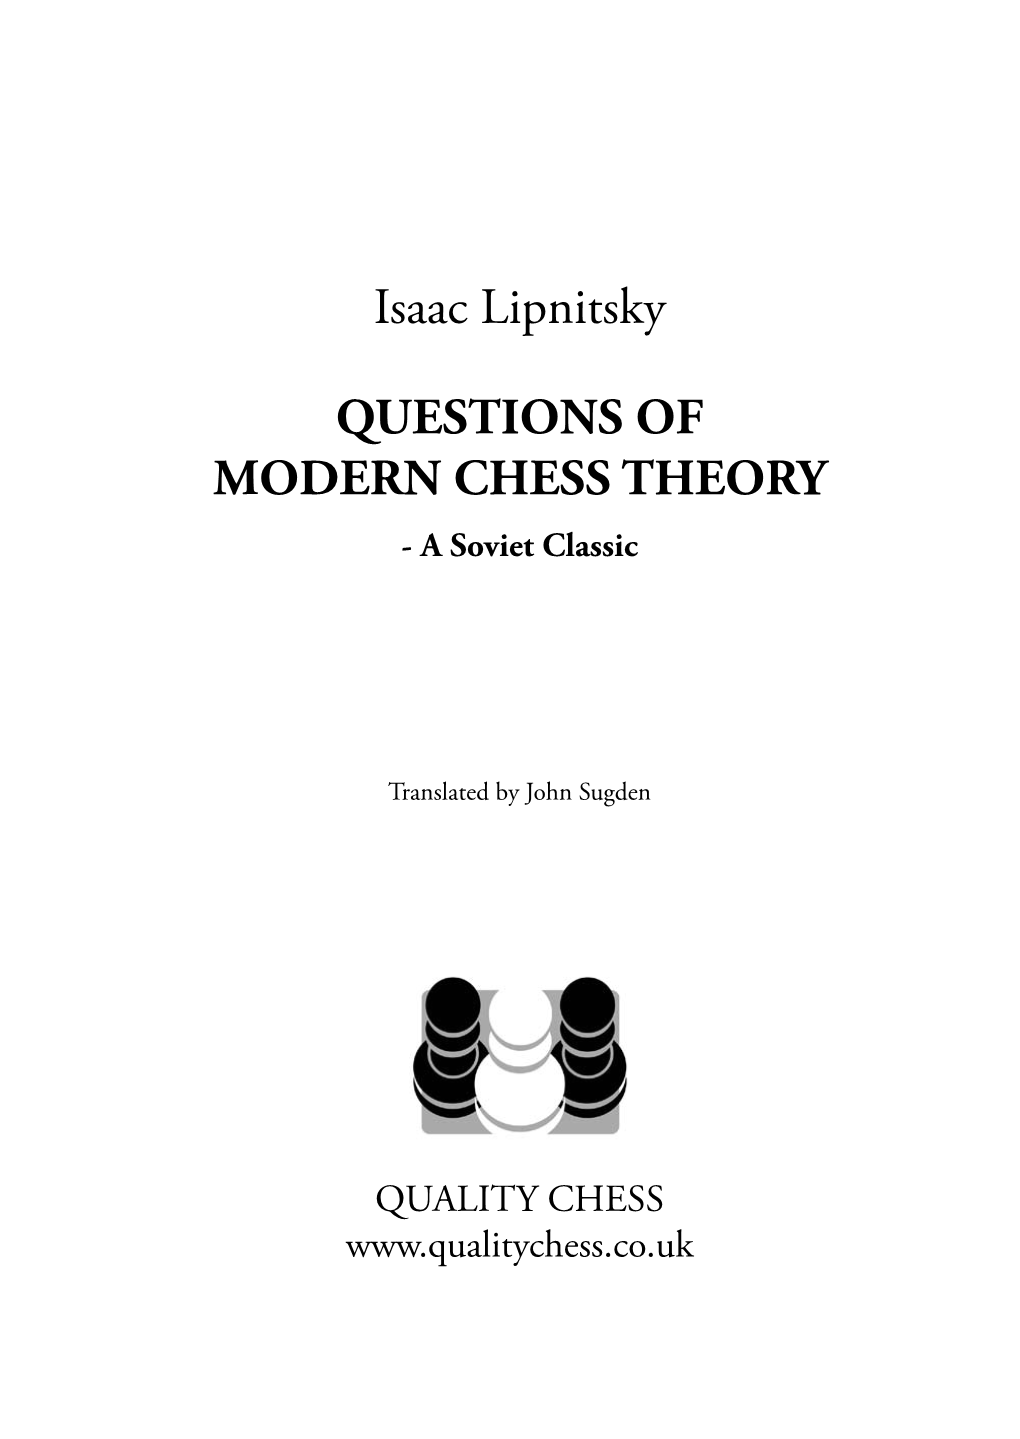 QUESTIONS of MODERN CHESS THEORY - a Soviet Classic